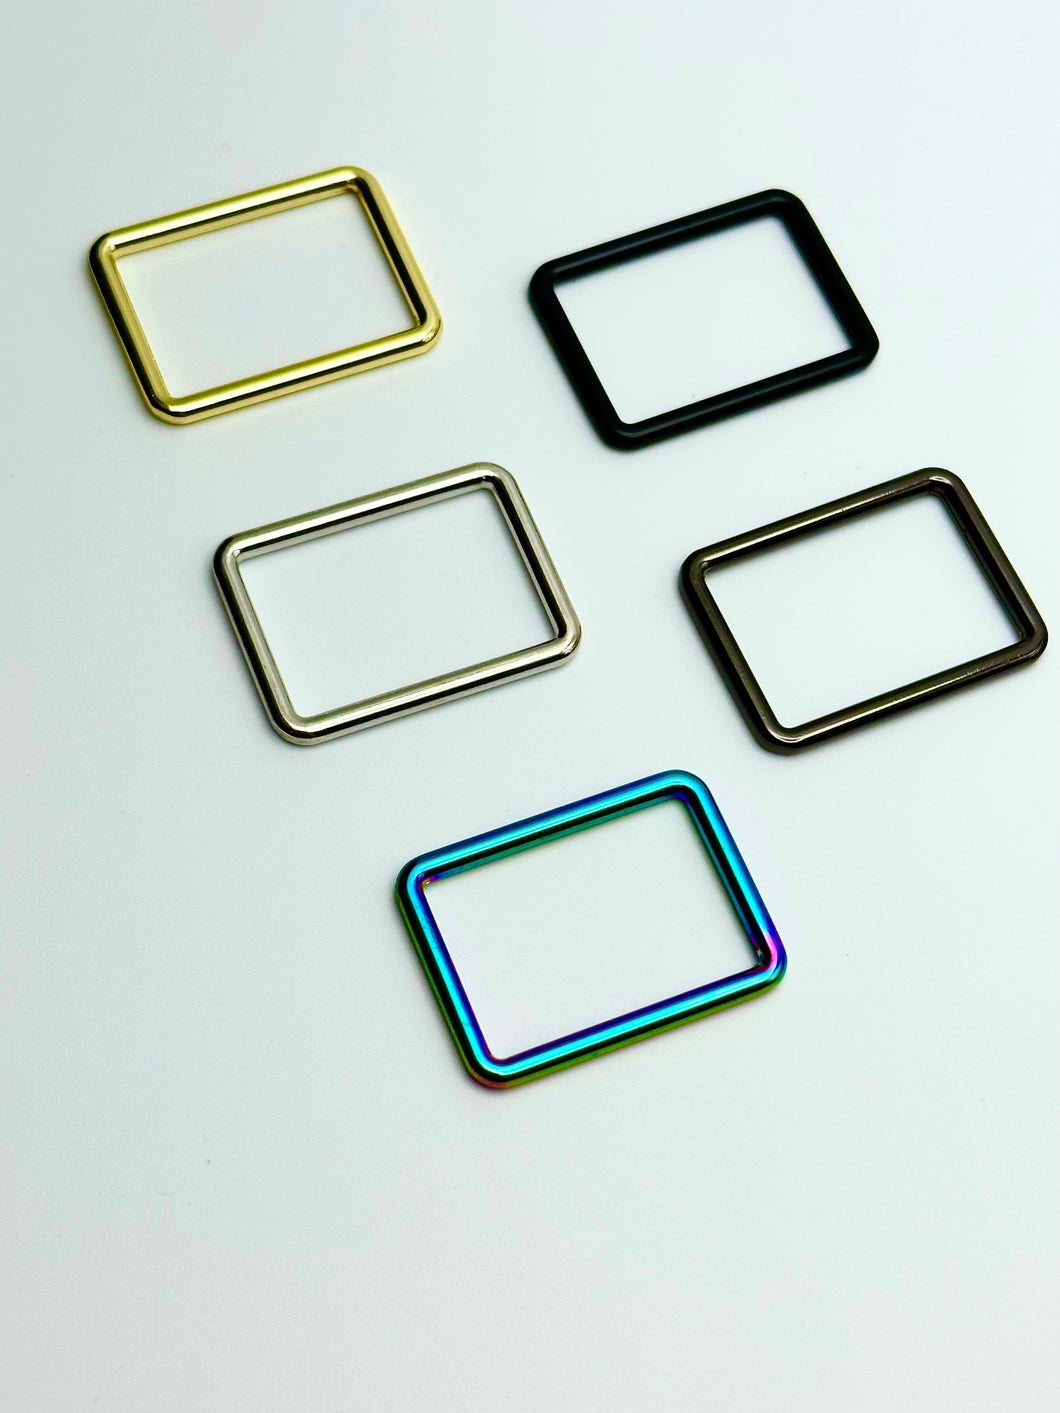 Thin Rectangle Ring 1” Wide (5 packs)